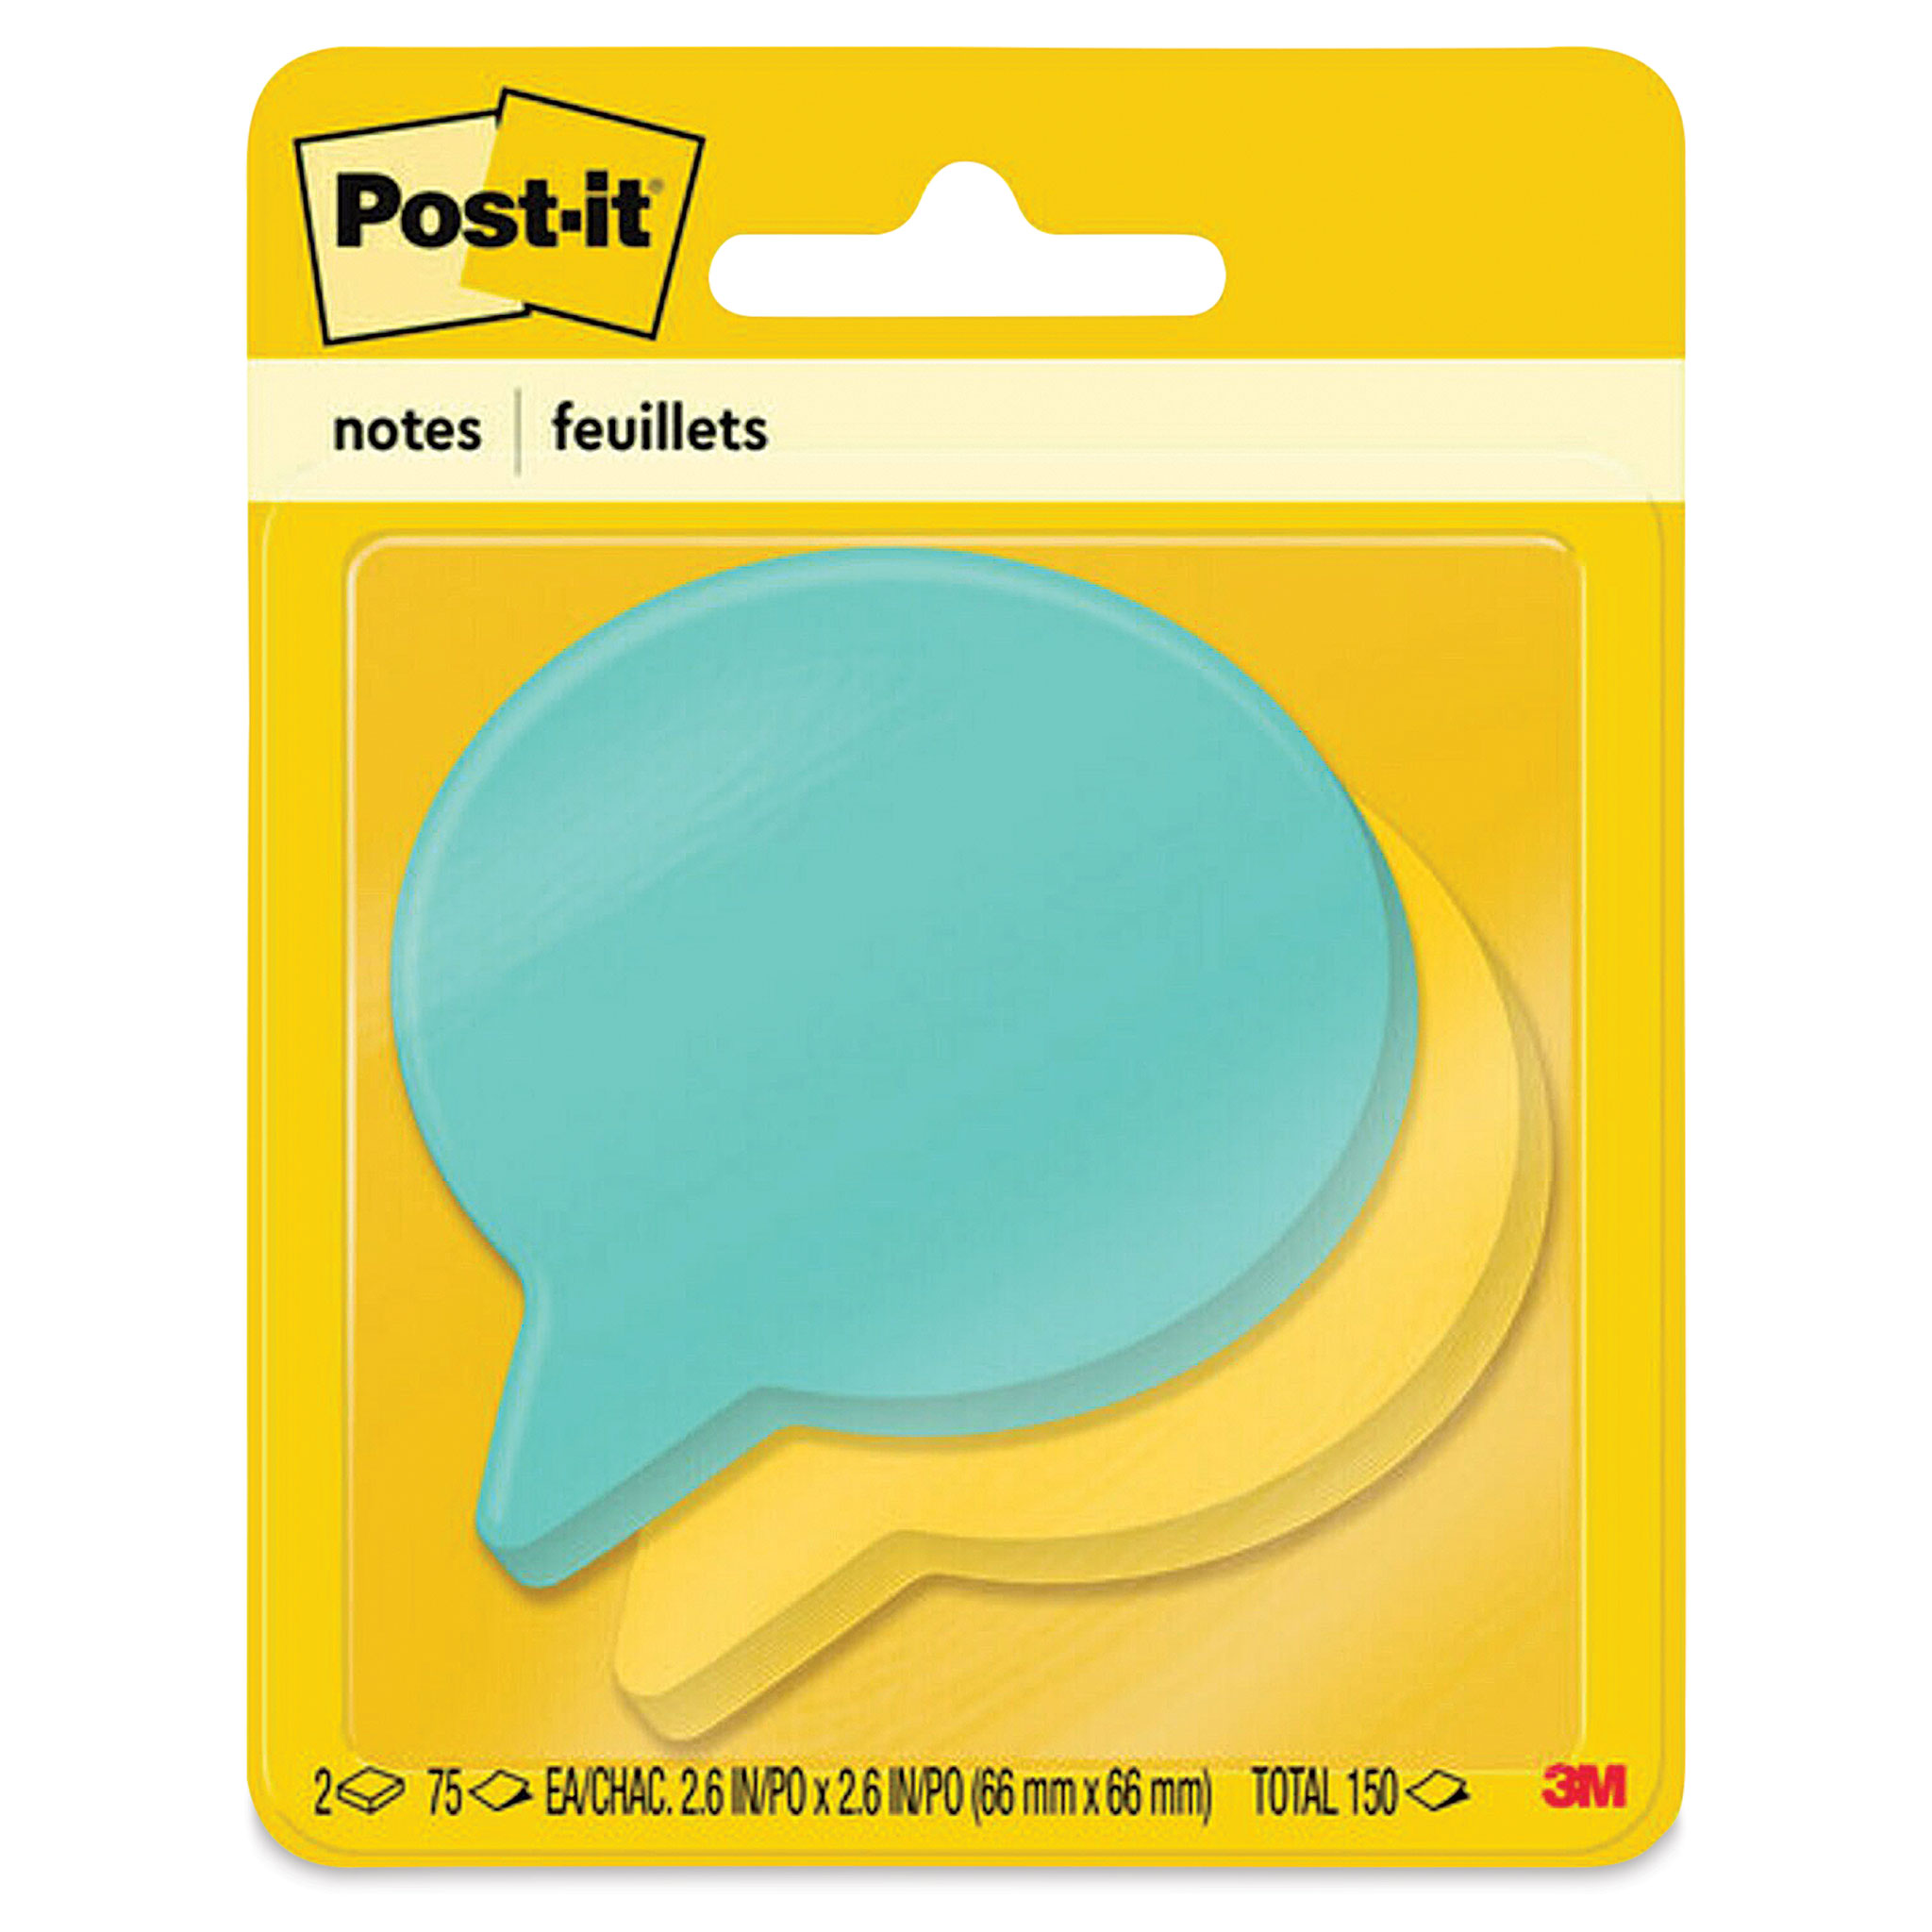 Pcxino 24Pads 720sheets Thought Cloud Sticky Notes,Talking Bubble  Shape,Self-Stick Notes for Students,Home Office School